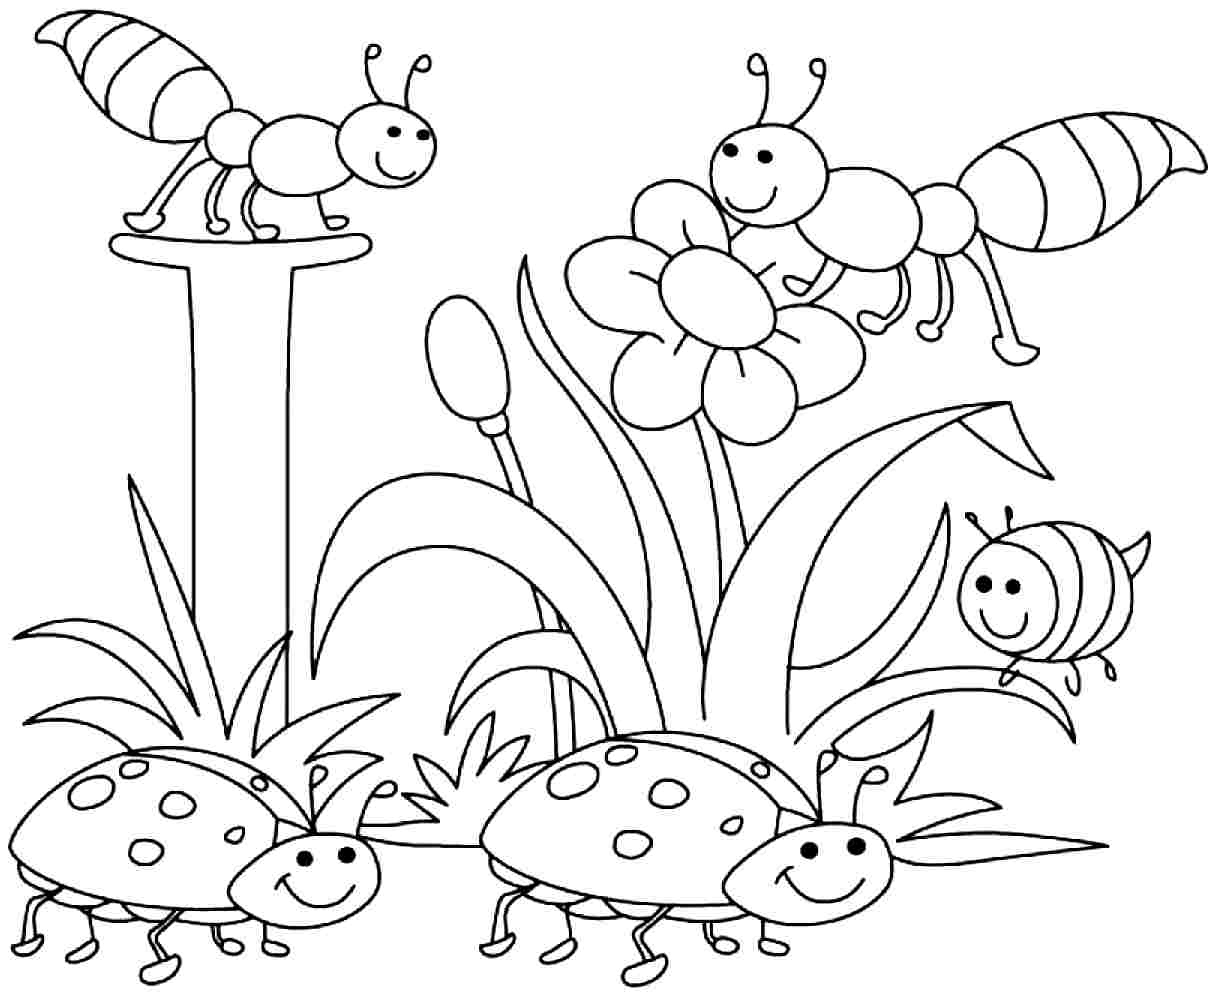 Springtime Coloring Pages (20 Pictures) - Colorine.net | 9433